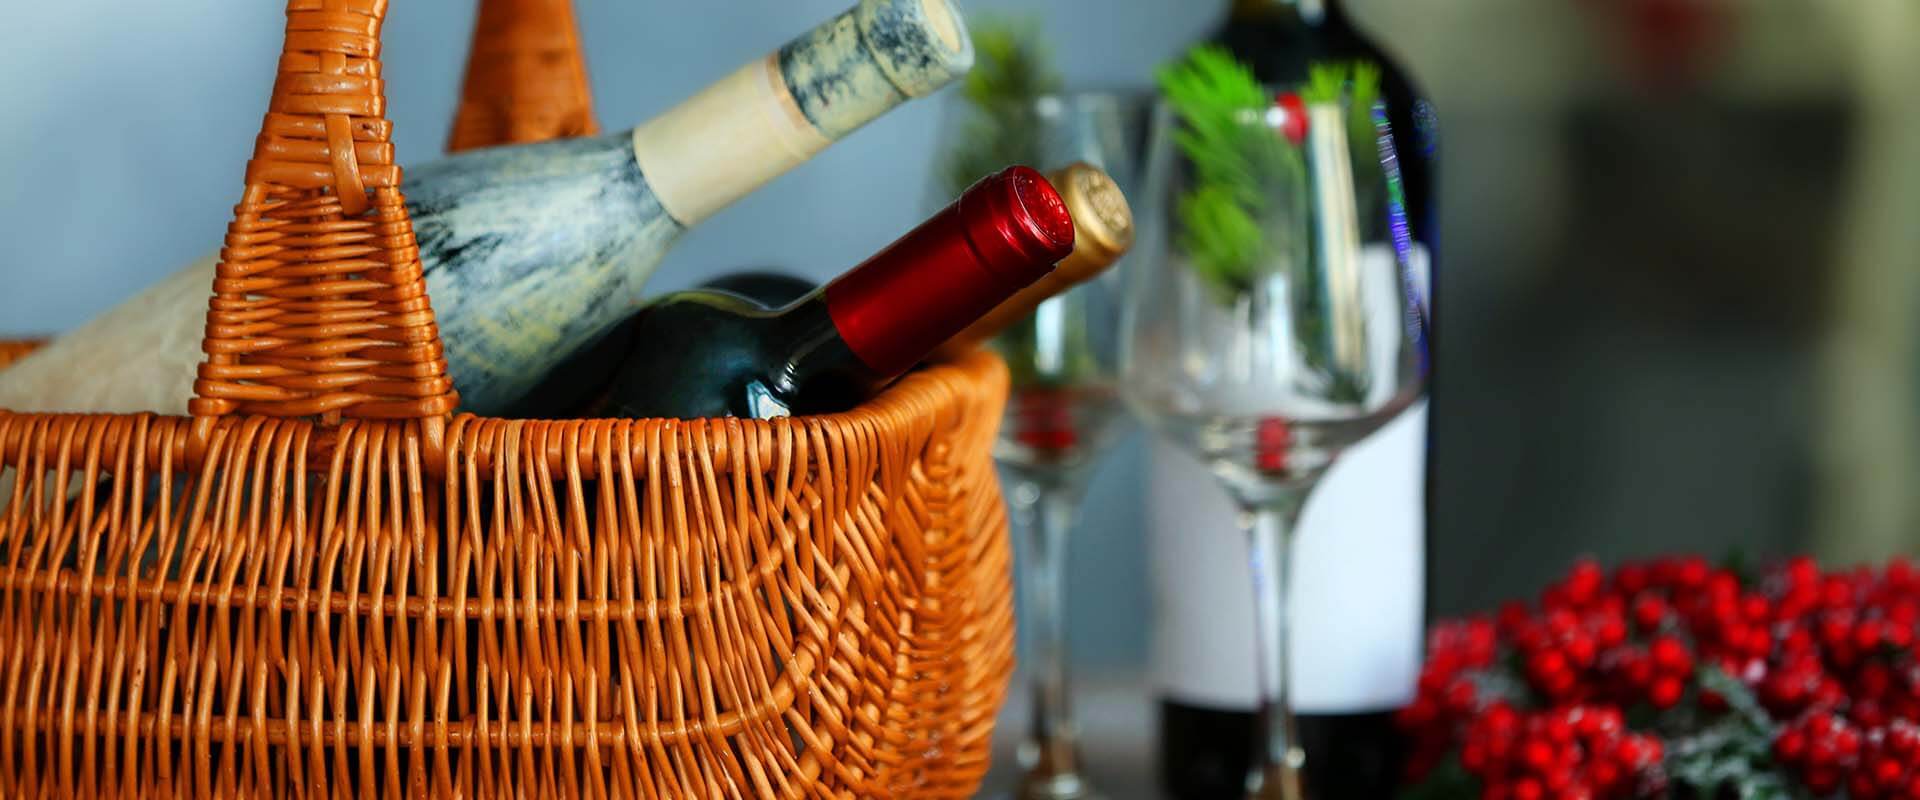 Christmas Gift Baskets with Wine